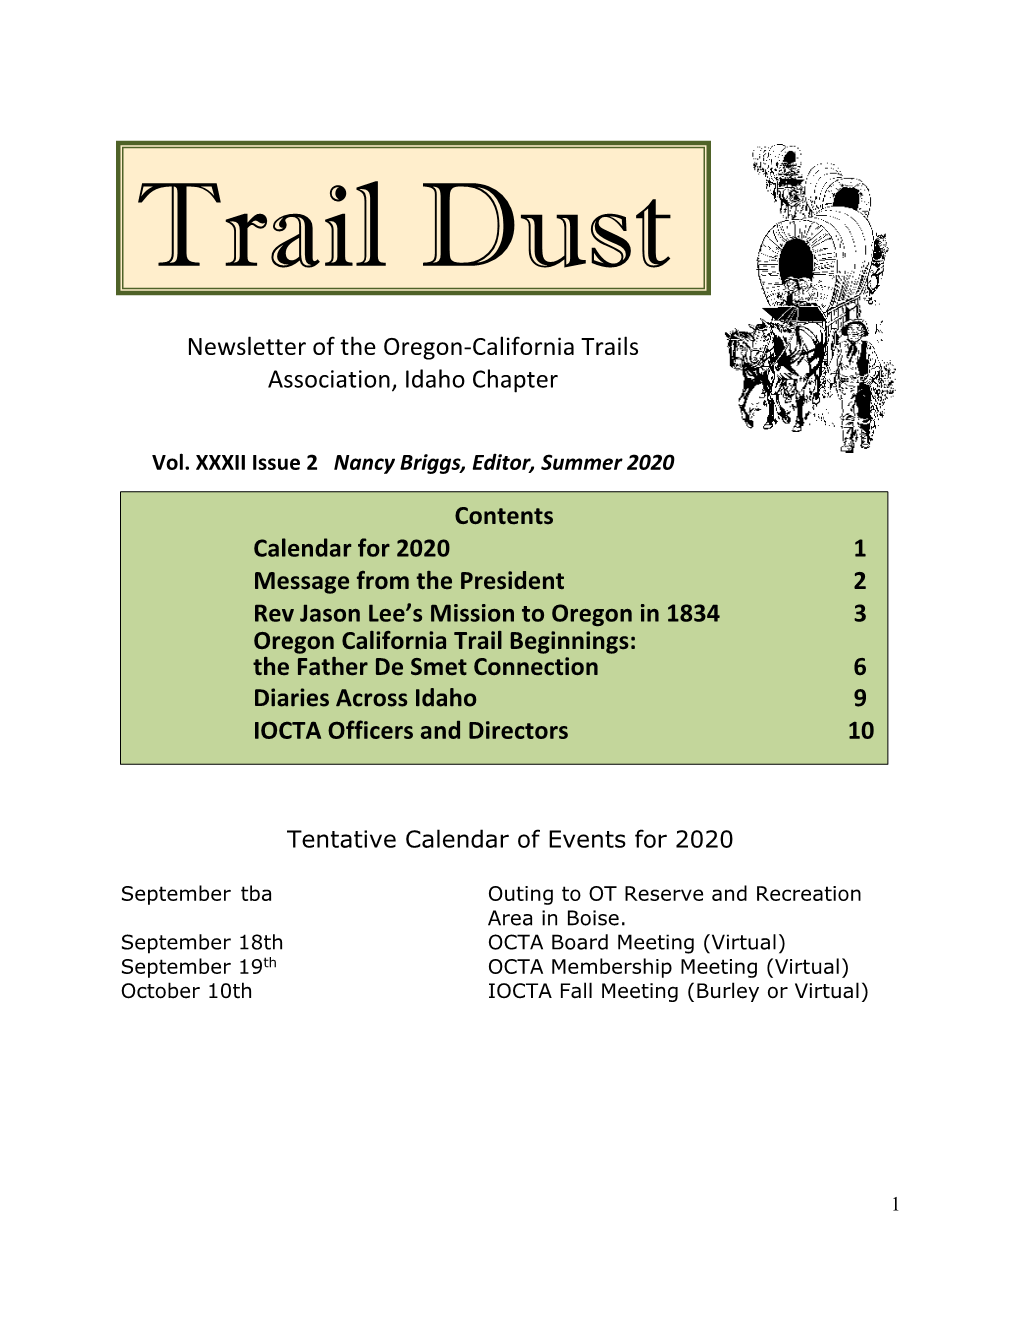 Newsletter of the Oregon-California Trails Association, Idaho Chapter